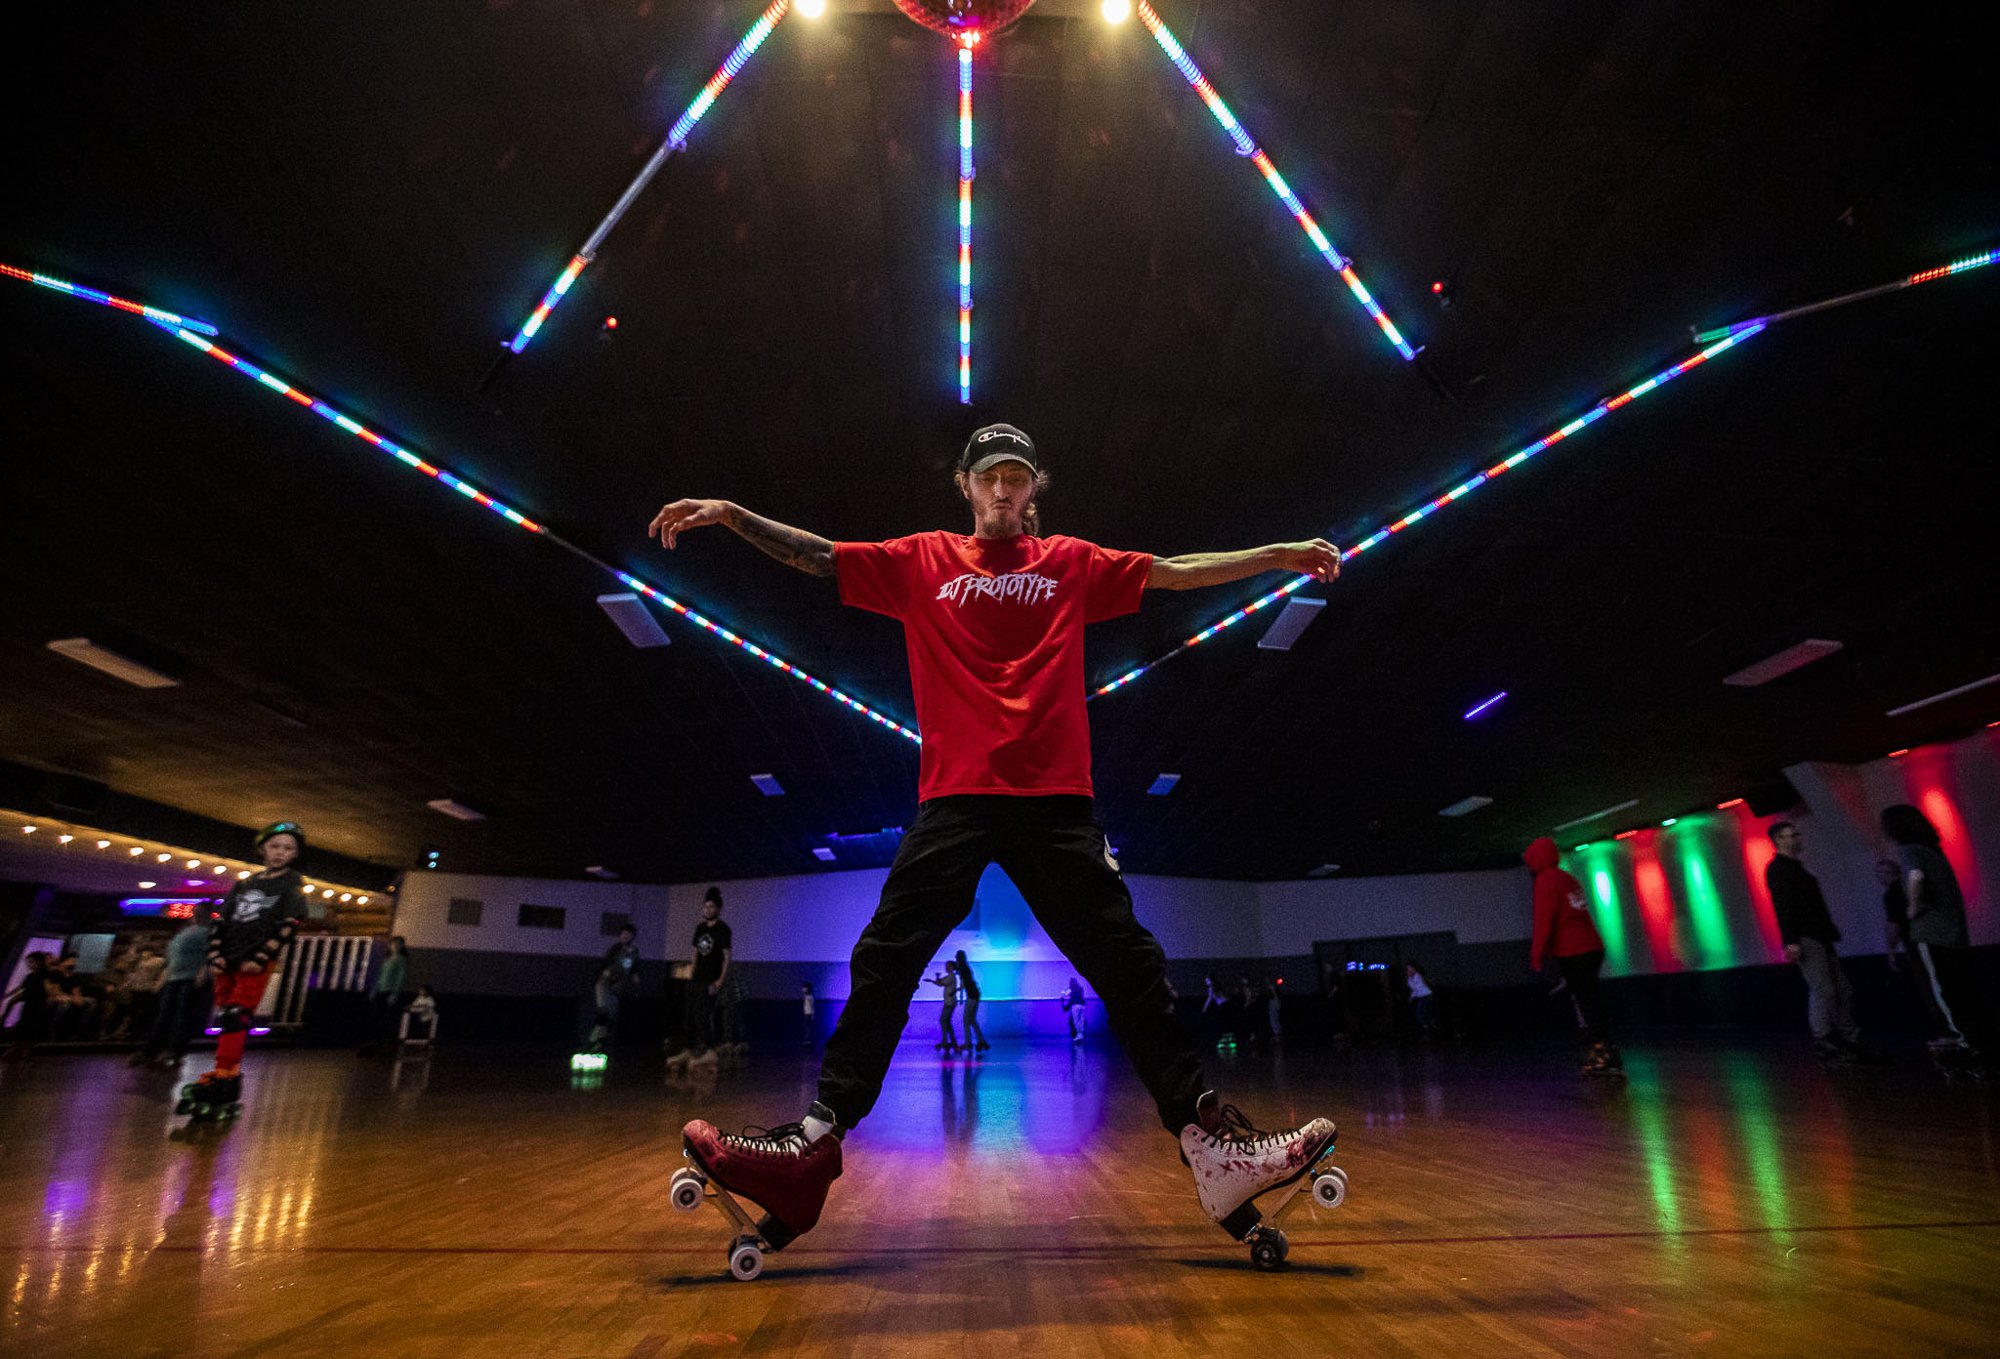  Joseph Cordell, a long time patron of the Everett Skate Deck, demonstrates some of his skate moves in the center of the floor during the final open skate session at the Everett Skate Deck on Sunday, April 3, 2022. After 61 years in business, Everett